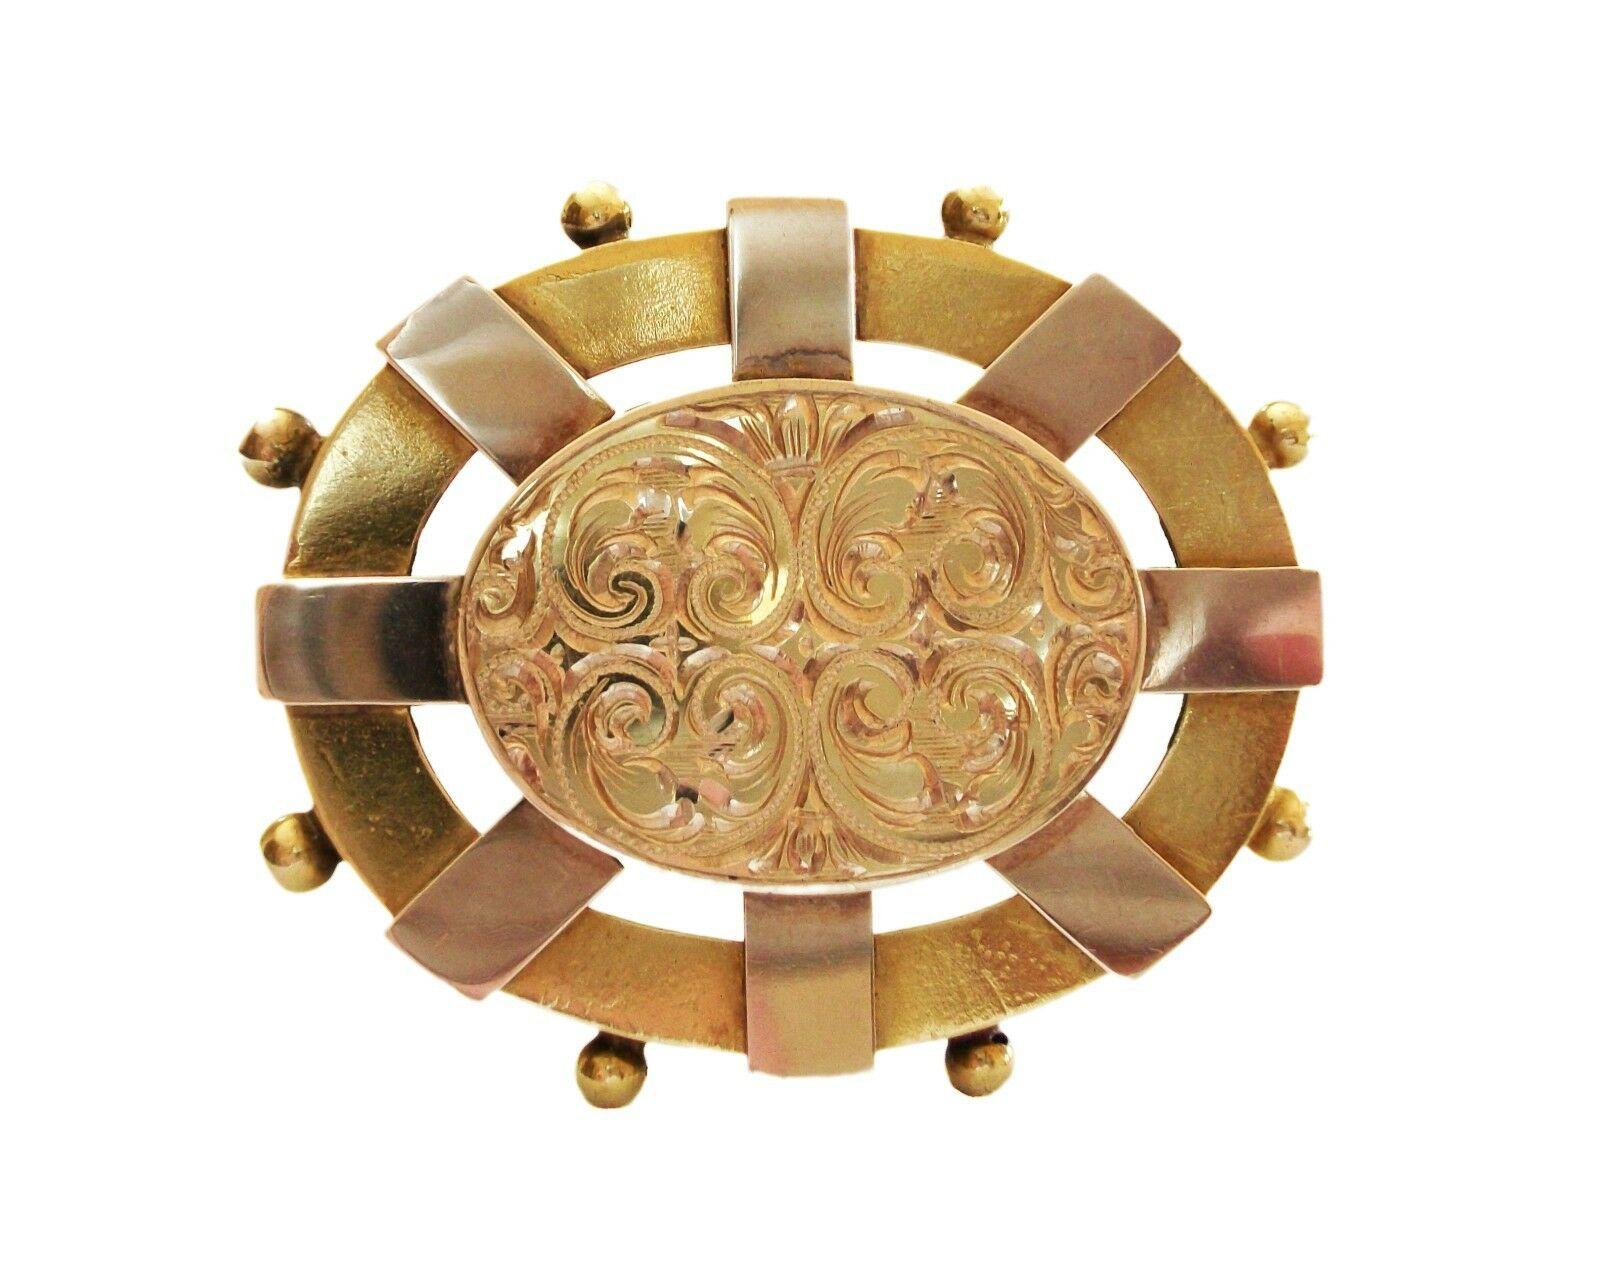 Victorian yellow gold Etruscan Revival brooch with locket to the back - fine and elaborate engraved gold scroll pattern to the front panel - hand made featuring gold balls to the rim - numerous auction house/jeweler notations to the back (one